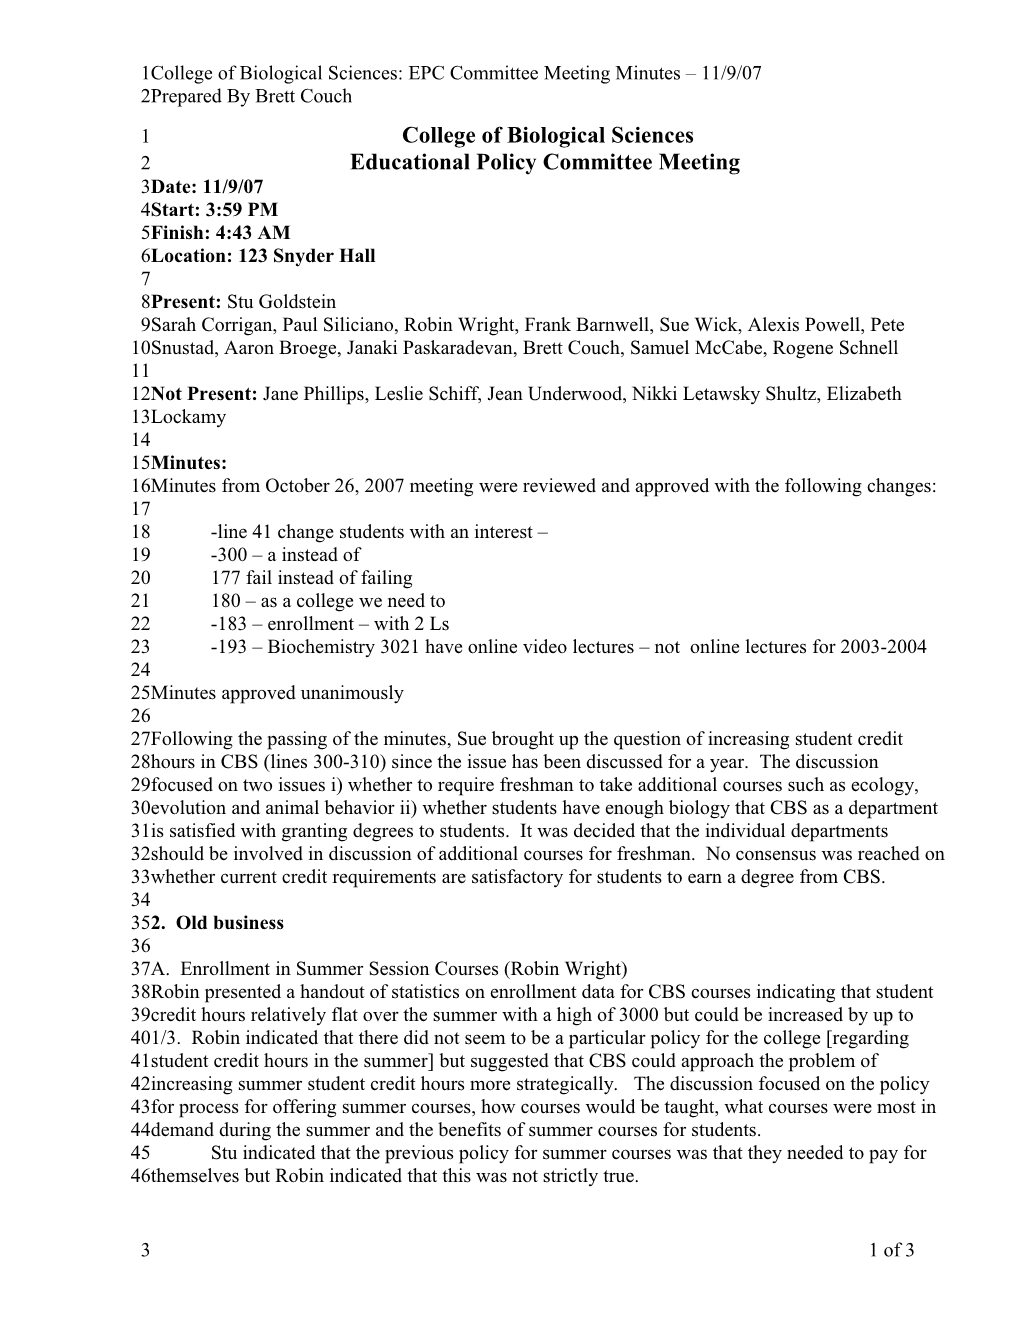 College of Biological Sciences: EPC Committee Meeting Minutes 11/9/07